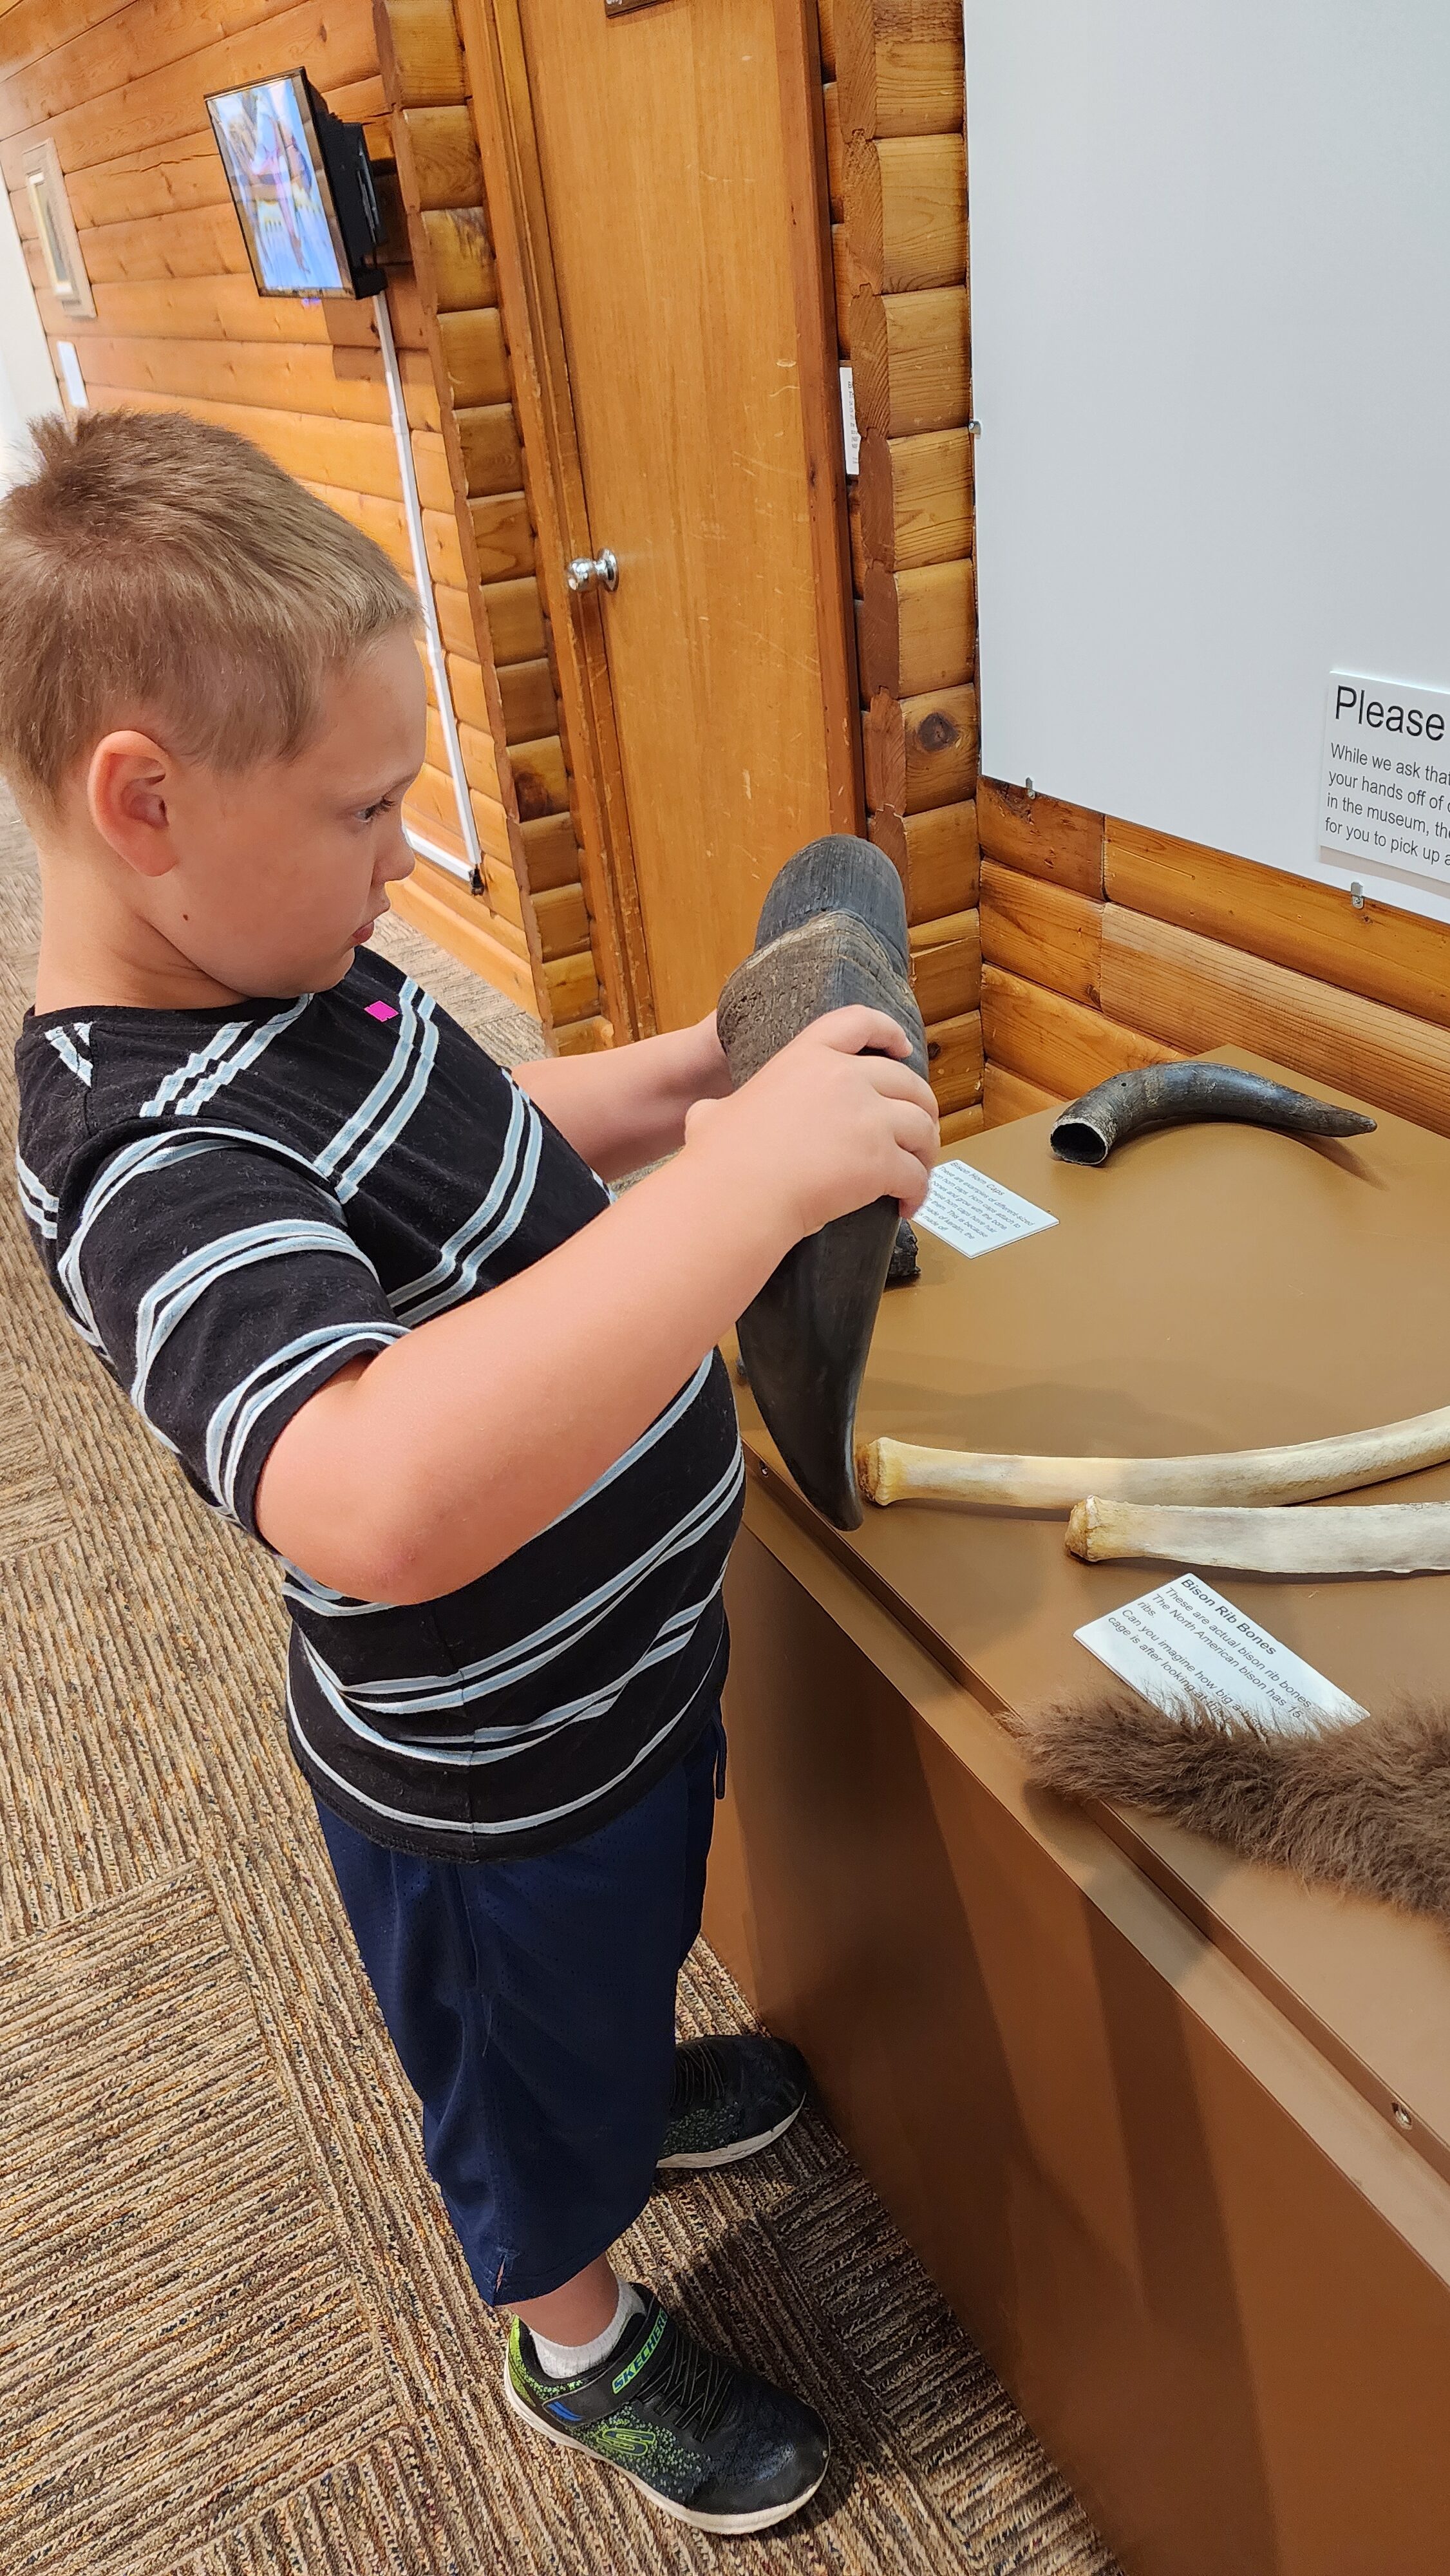 Hands on for kids at museum